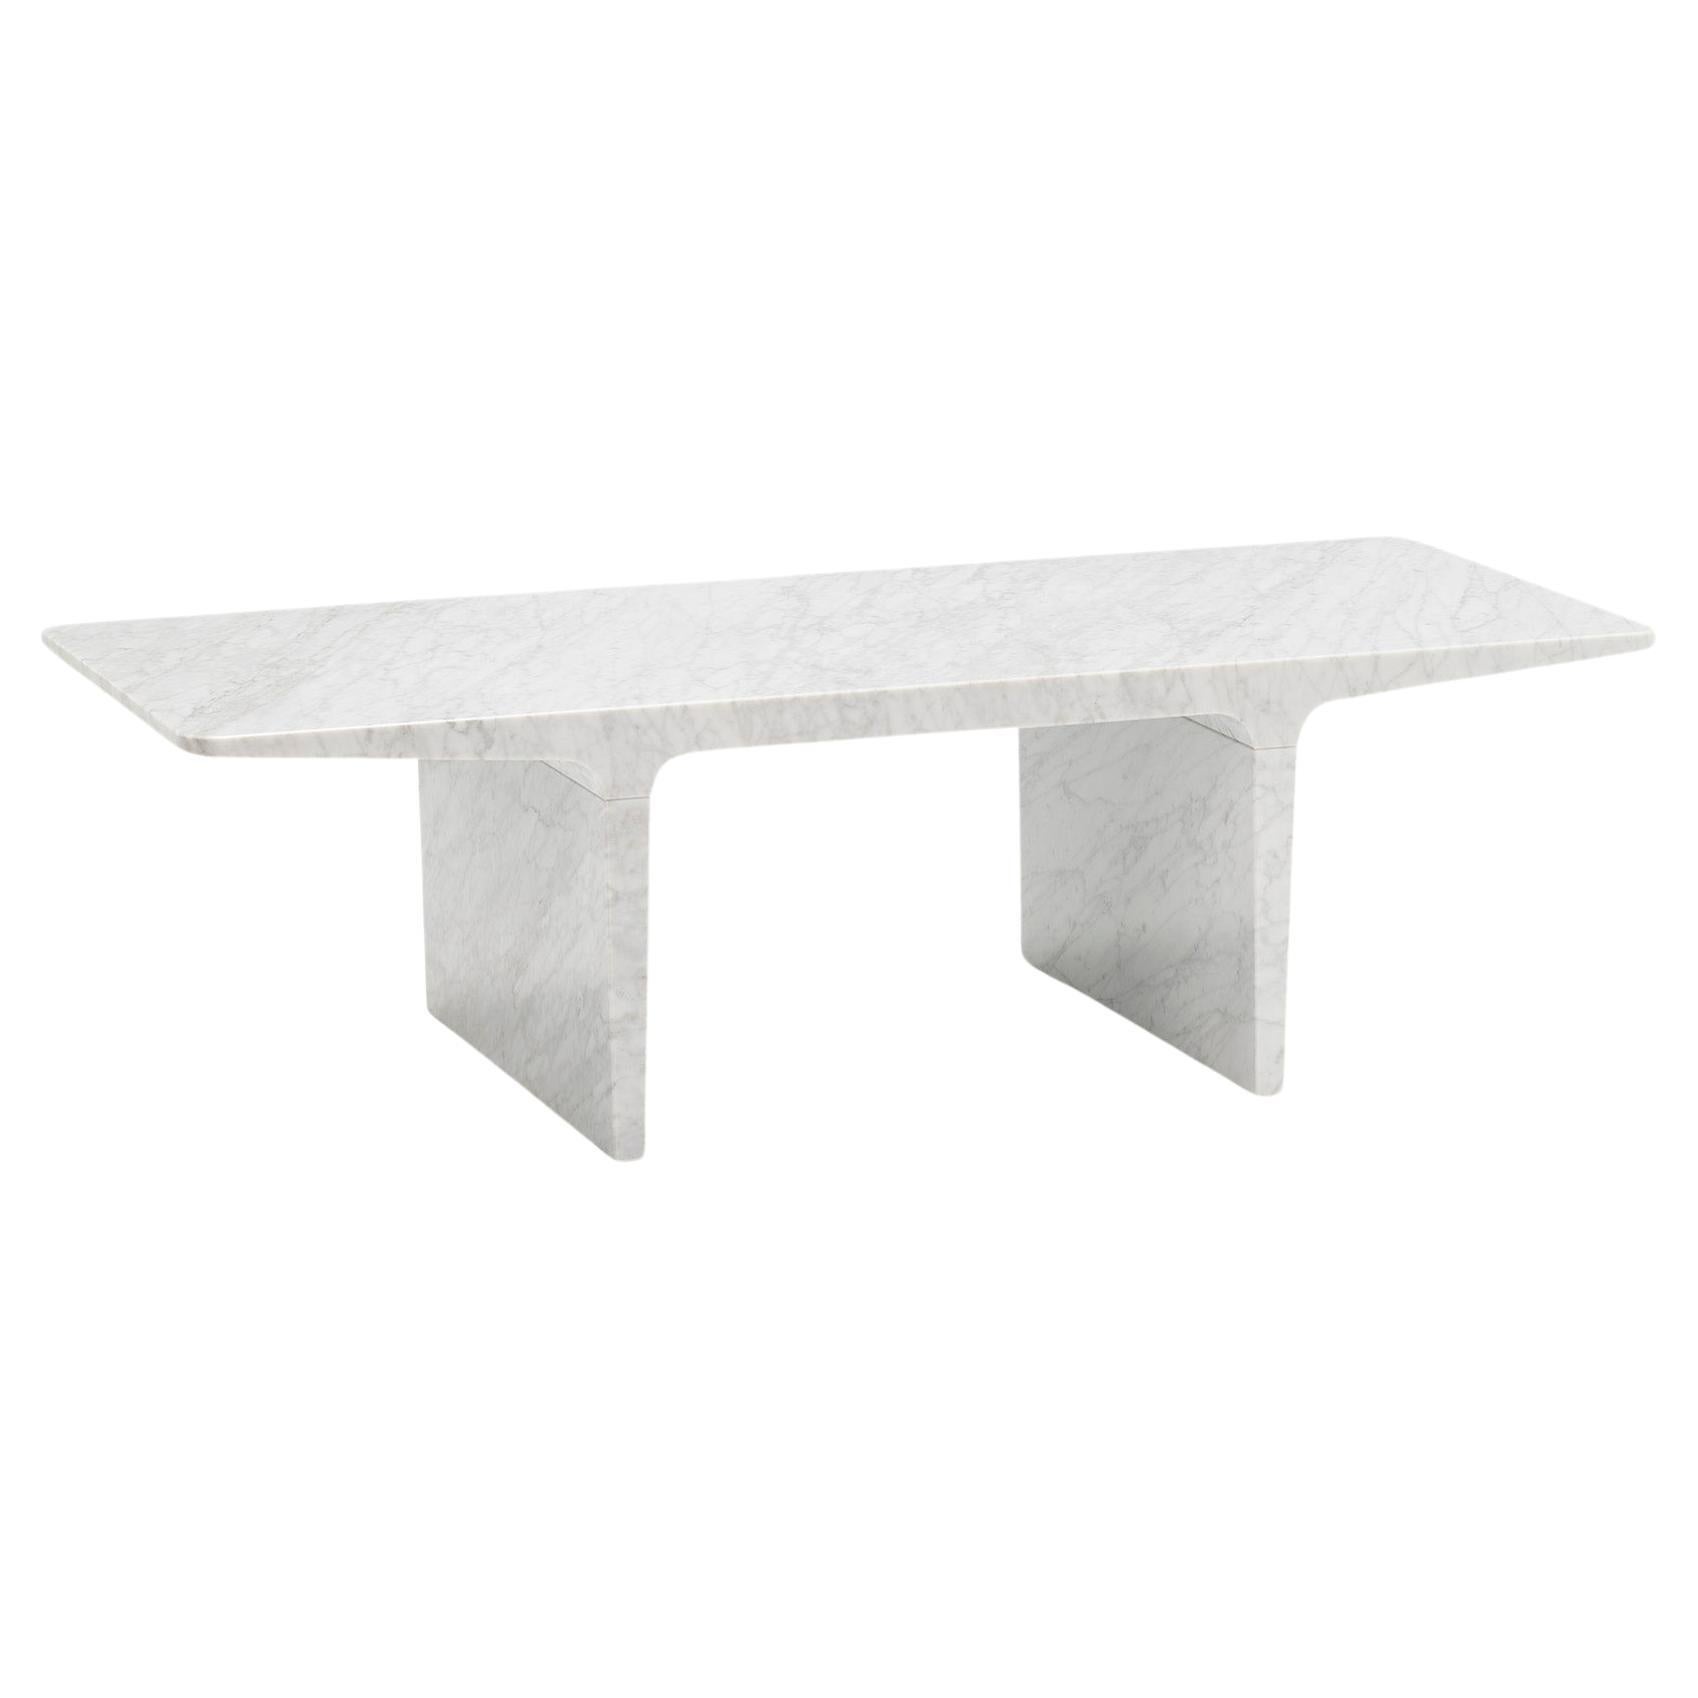 James Irvine Ponte Low Table For Sale